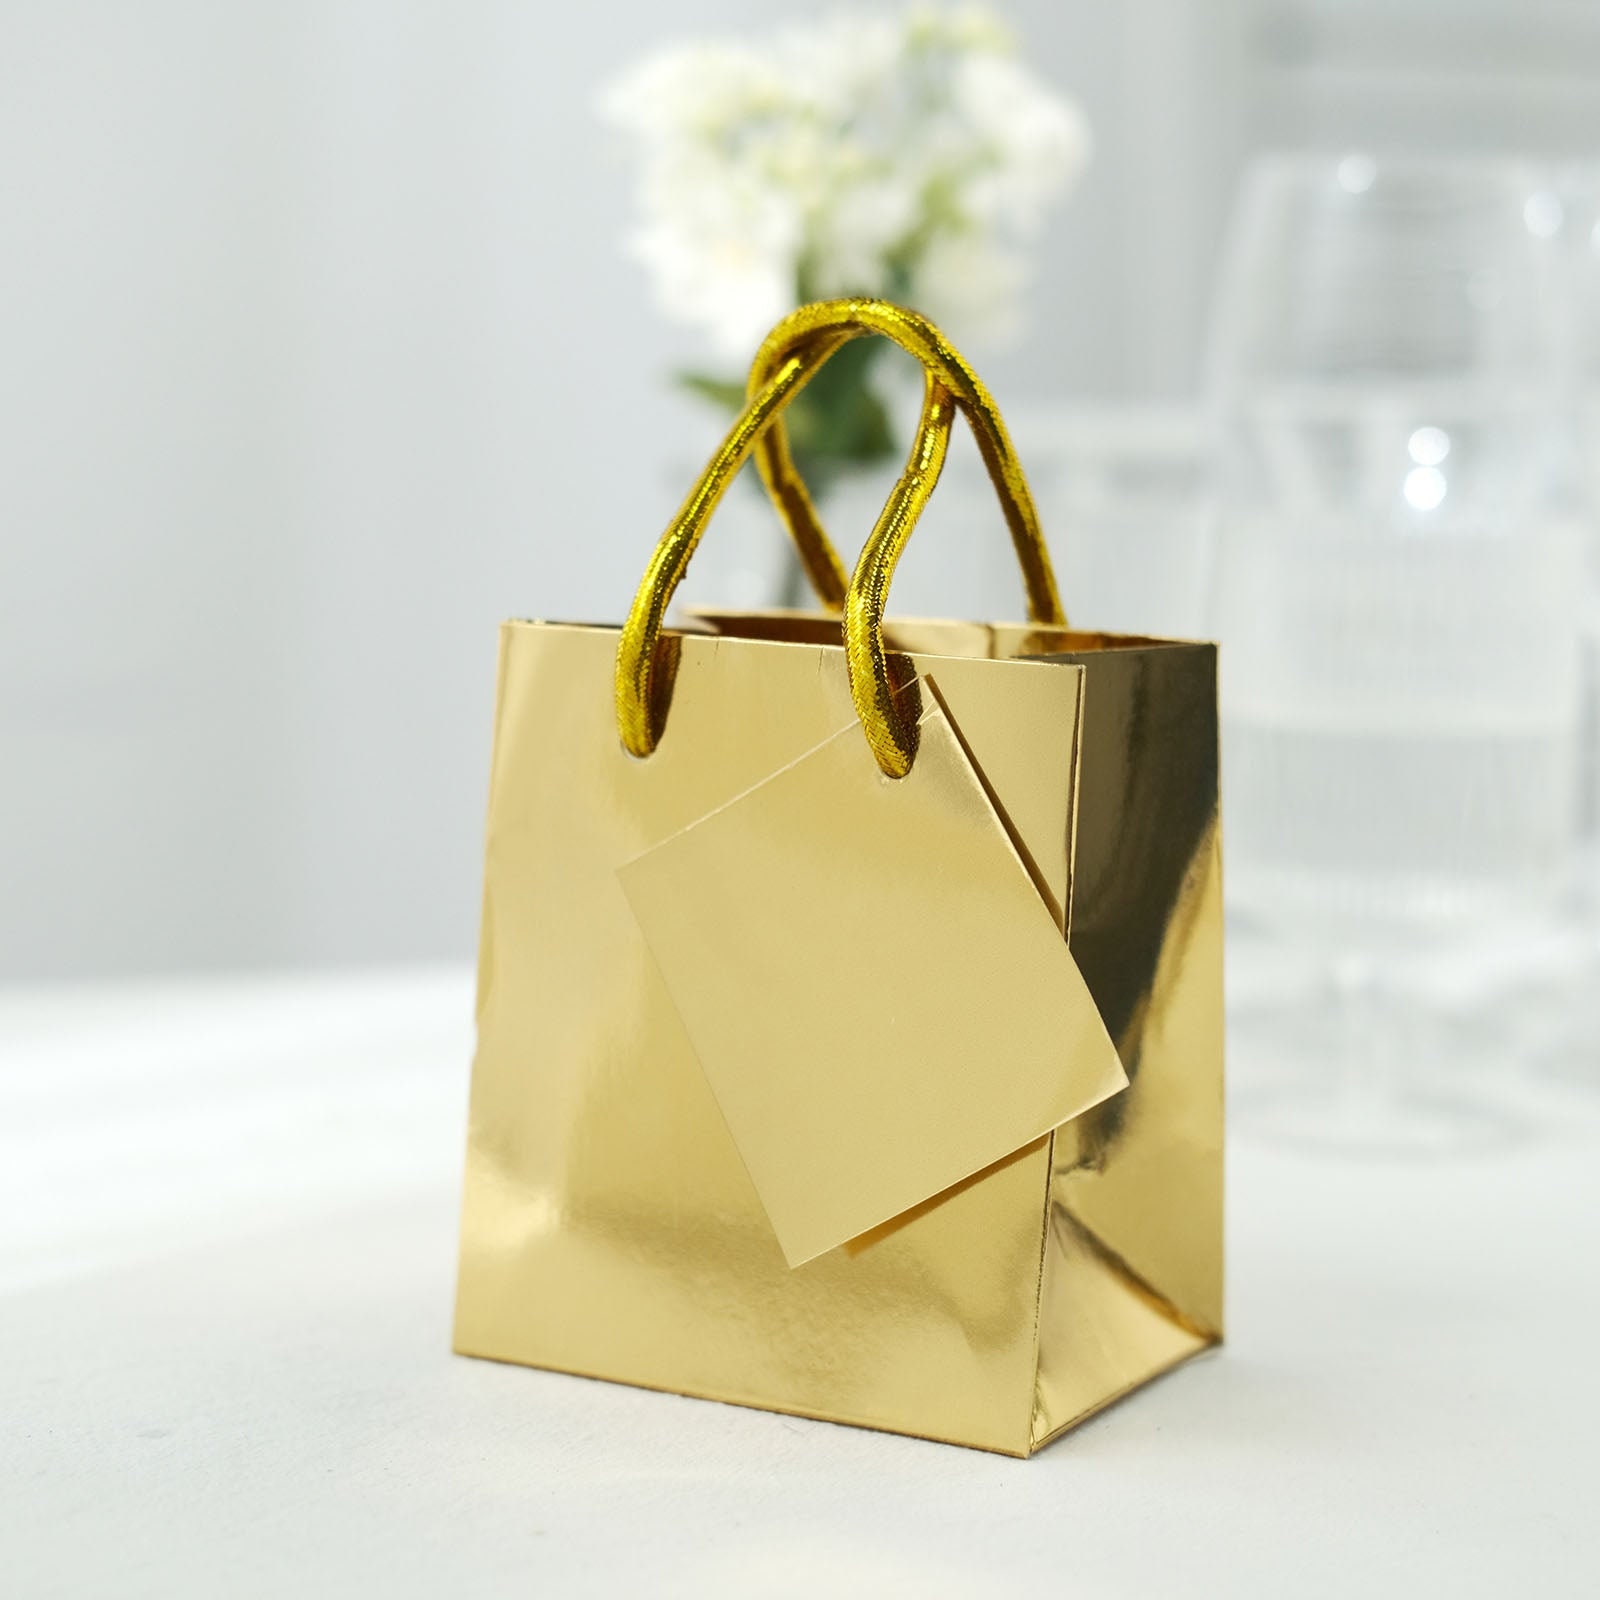 12 Pack 5 Shiny Metallic Gold Foil Paper Bags, Gift Bags With Handles,  Small Party Favor Goodie Bags, Shopping Bags, Wedding Guest Bags 